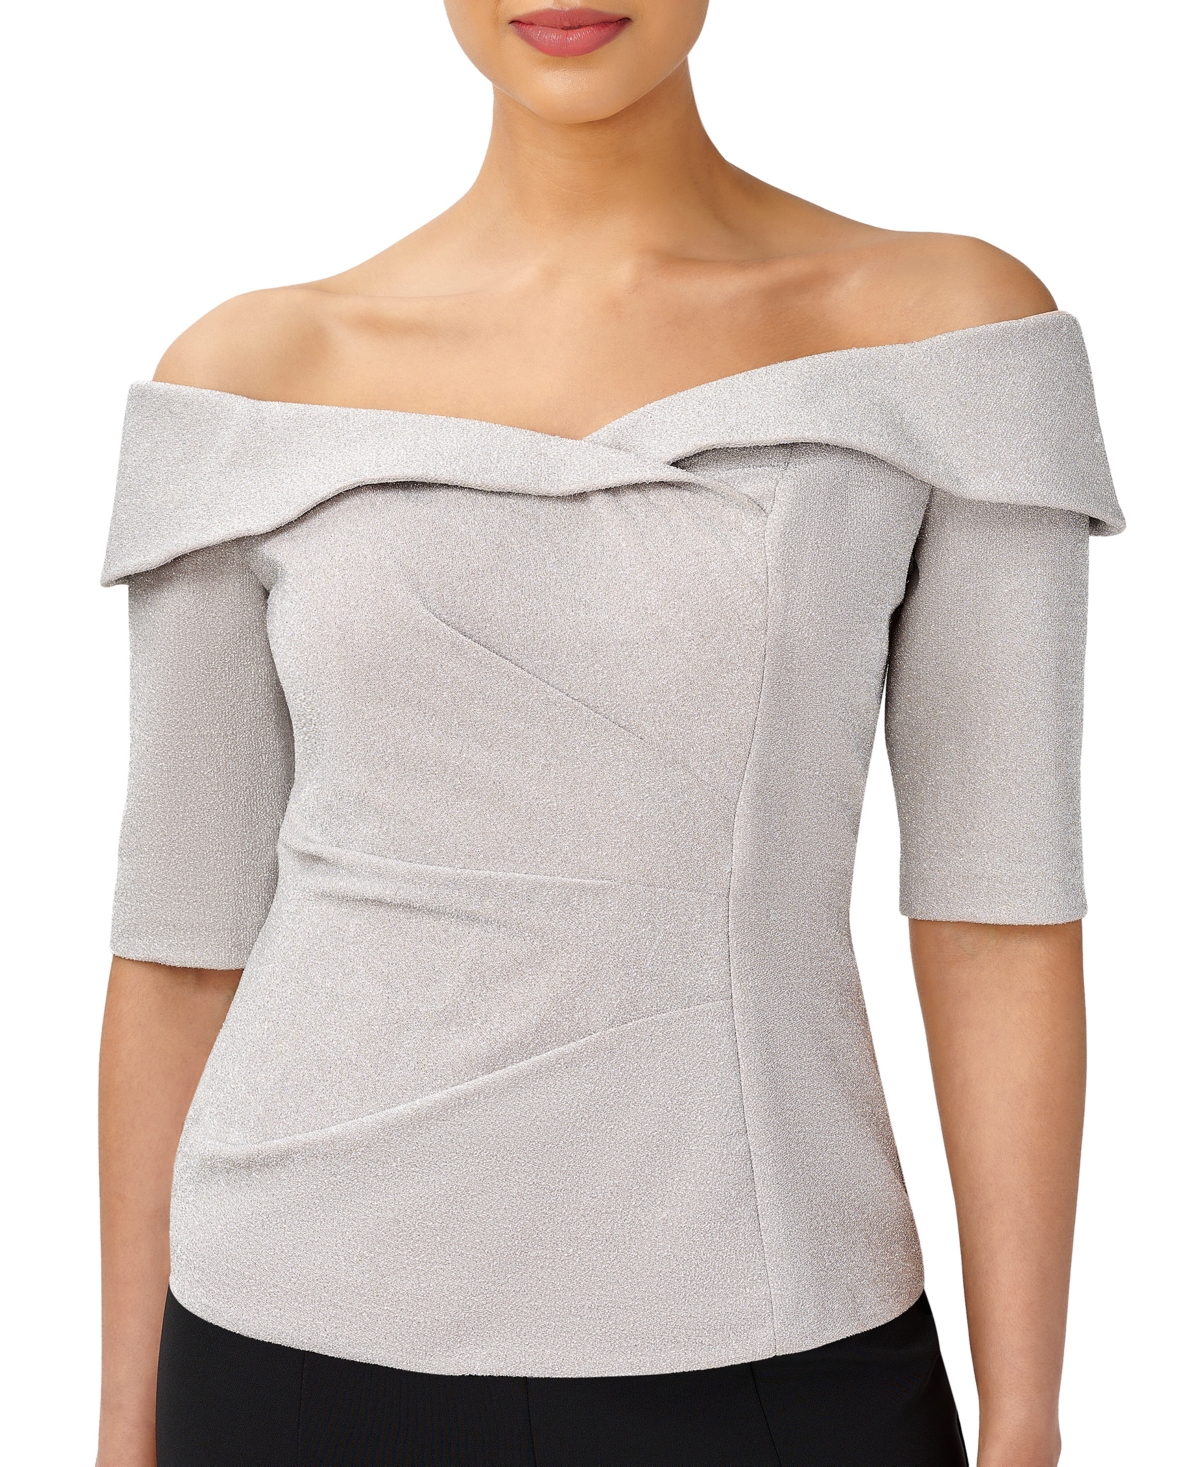  Adrianna Papell Women's Ruched Off-The-Shoulder Top